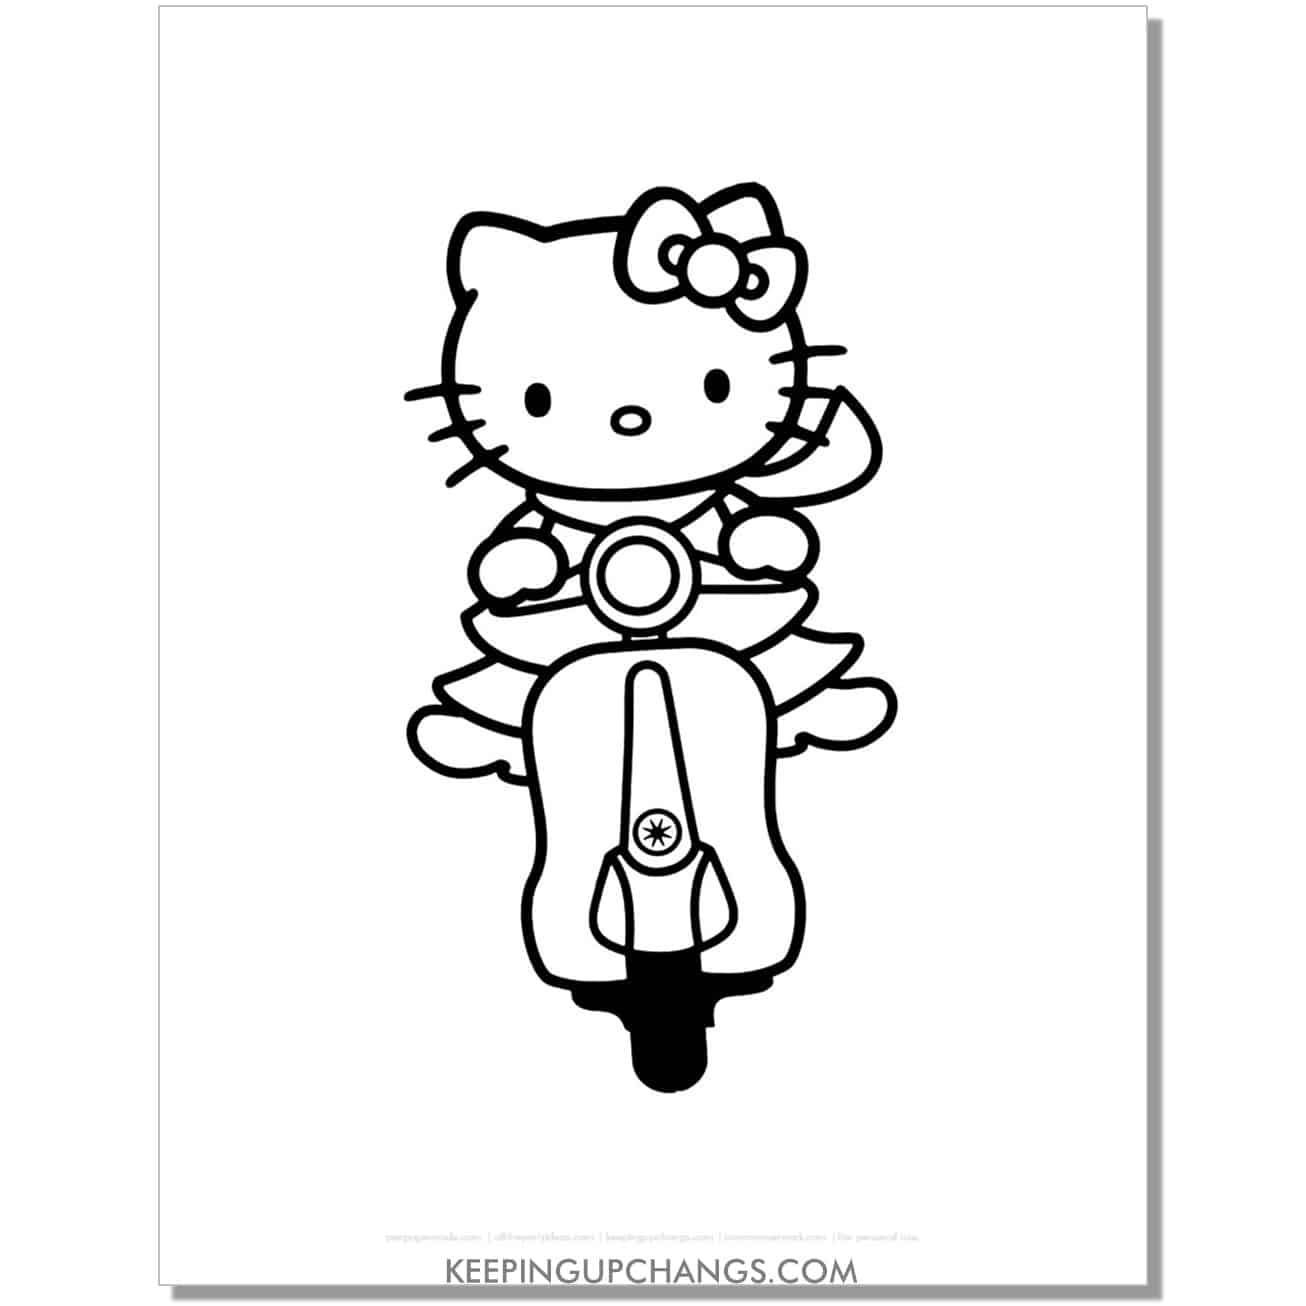 tourist on moped hello kitty coloring page.